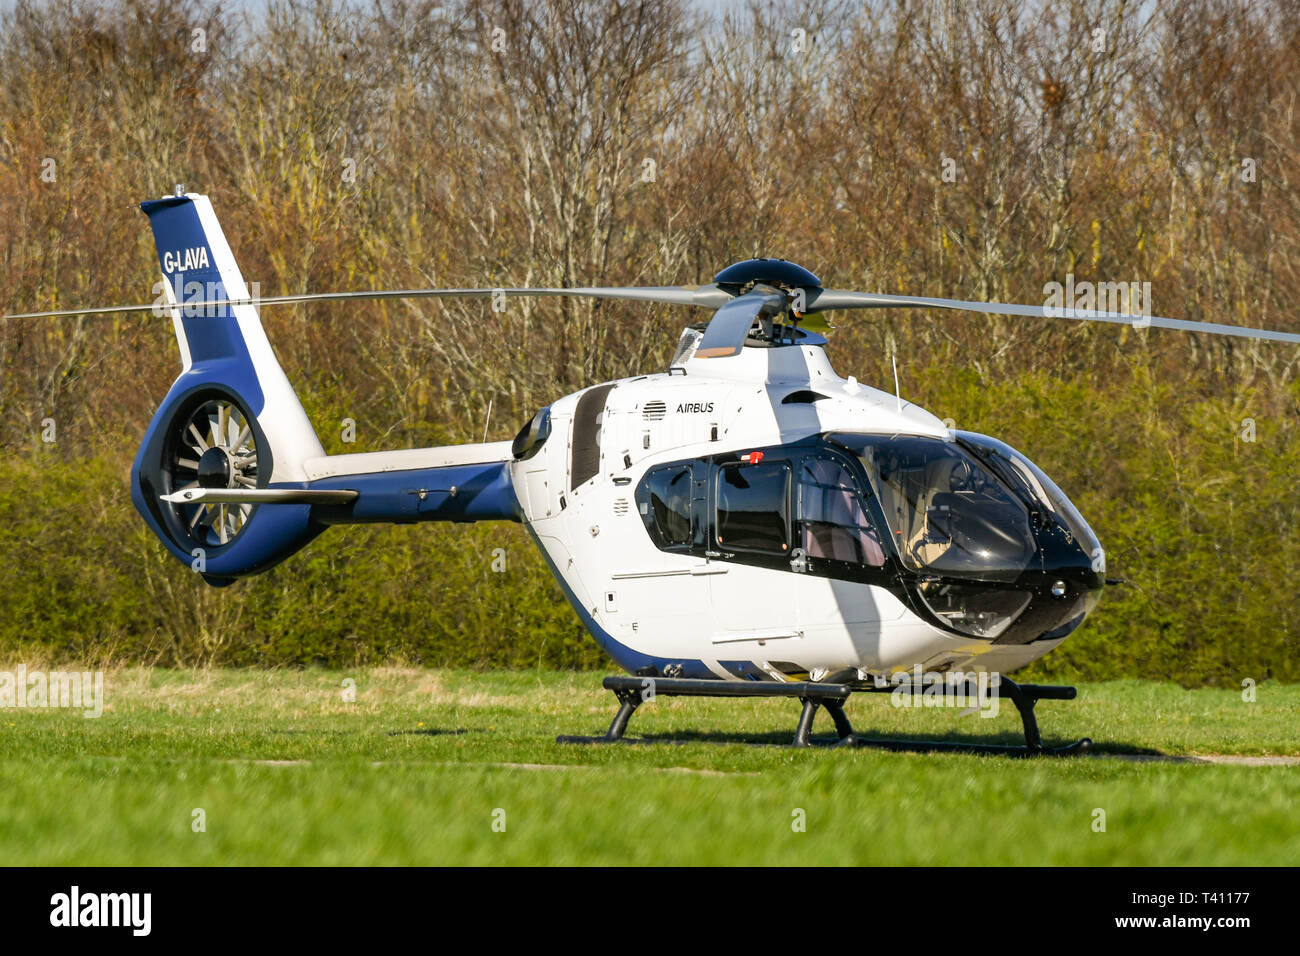 HIGH WYCOMBE, EN ANGLETERRE - Mars 2019 : Airbus Helicopters hélicoptère H135 sur le sol à Wycombe Air Park. Banque D'Images